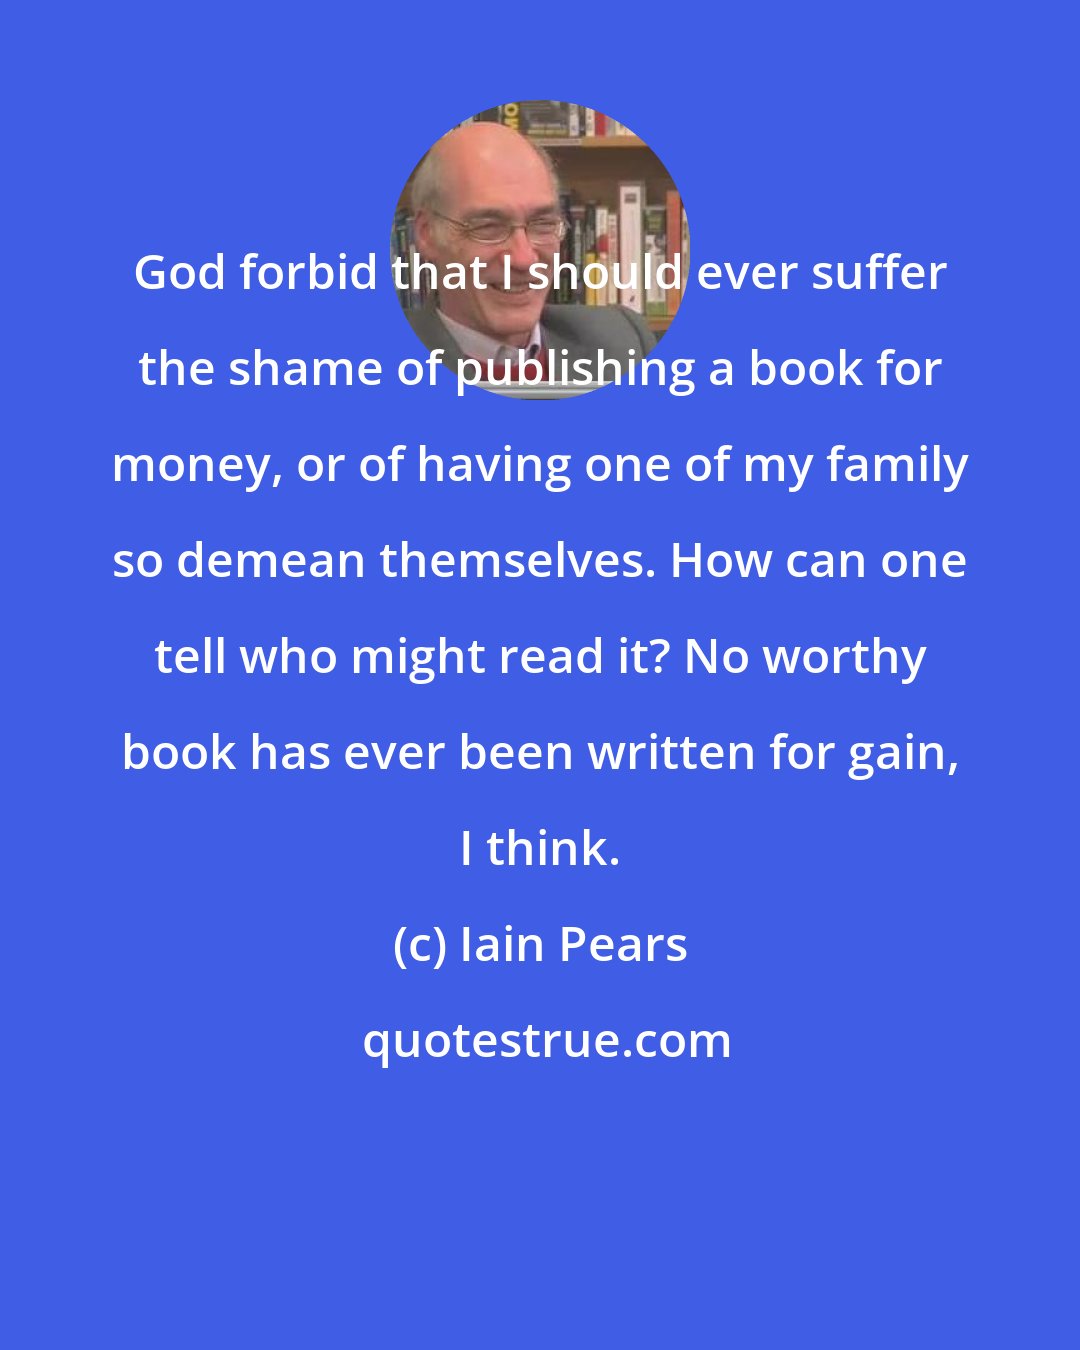 Iain Pears: God forbid that I should ever suffer the shame of publishing a book for money, or of having one of my family so demean themselves. How can one tell who might read it? No worthy book has ever been written for gain, I think.